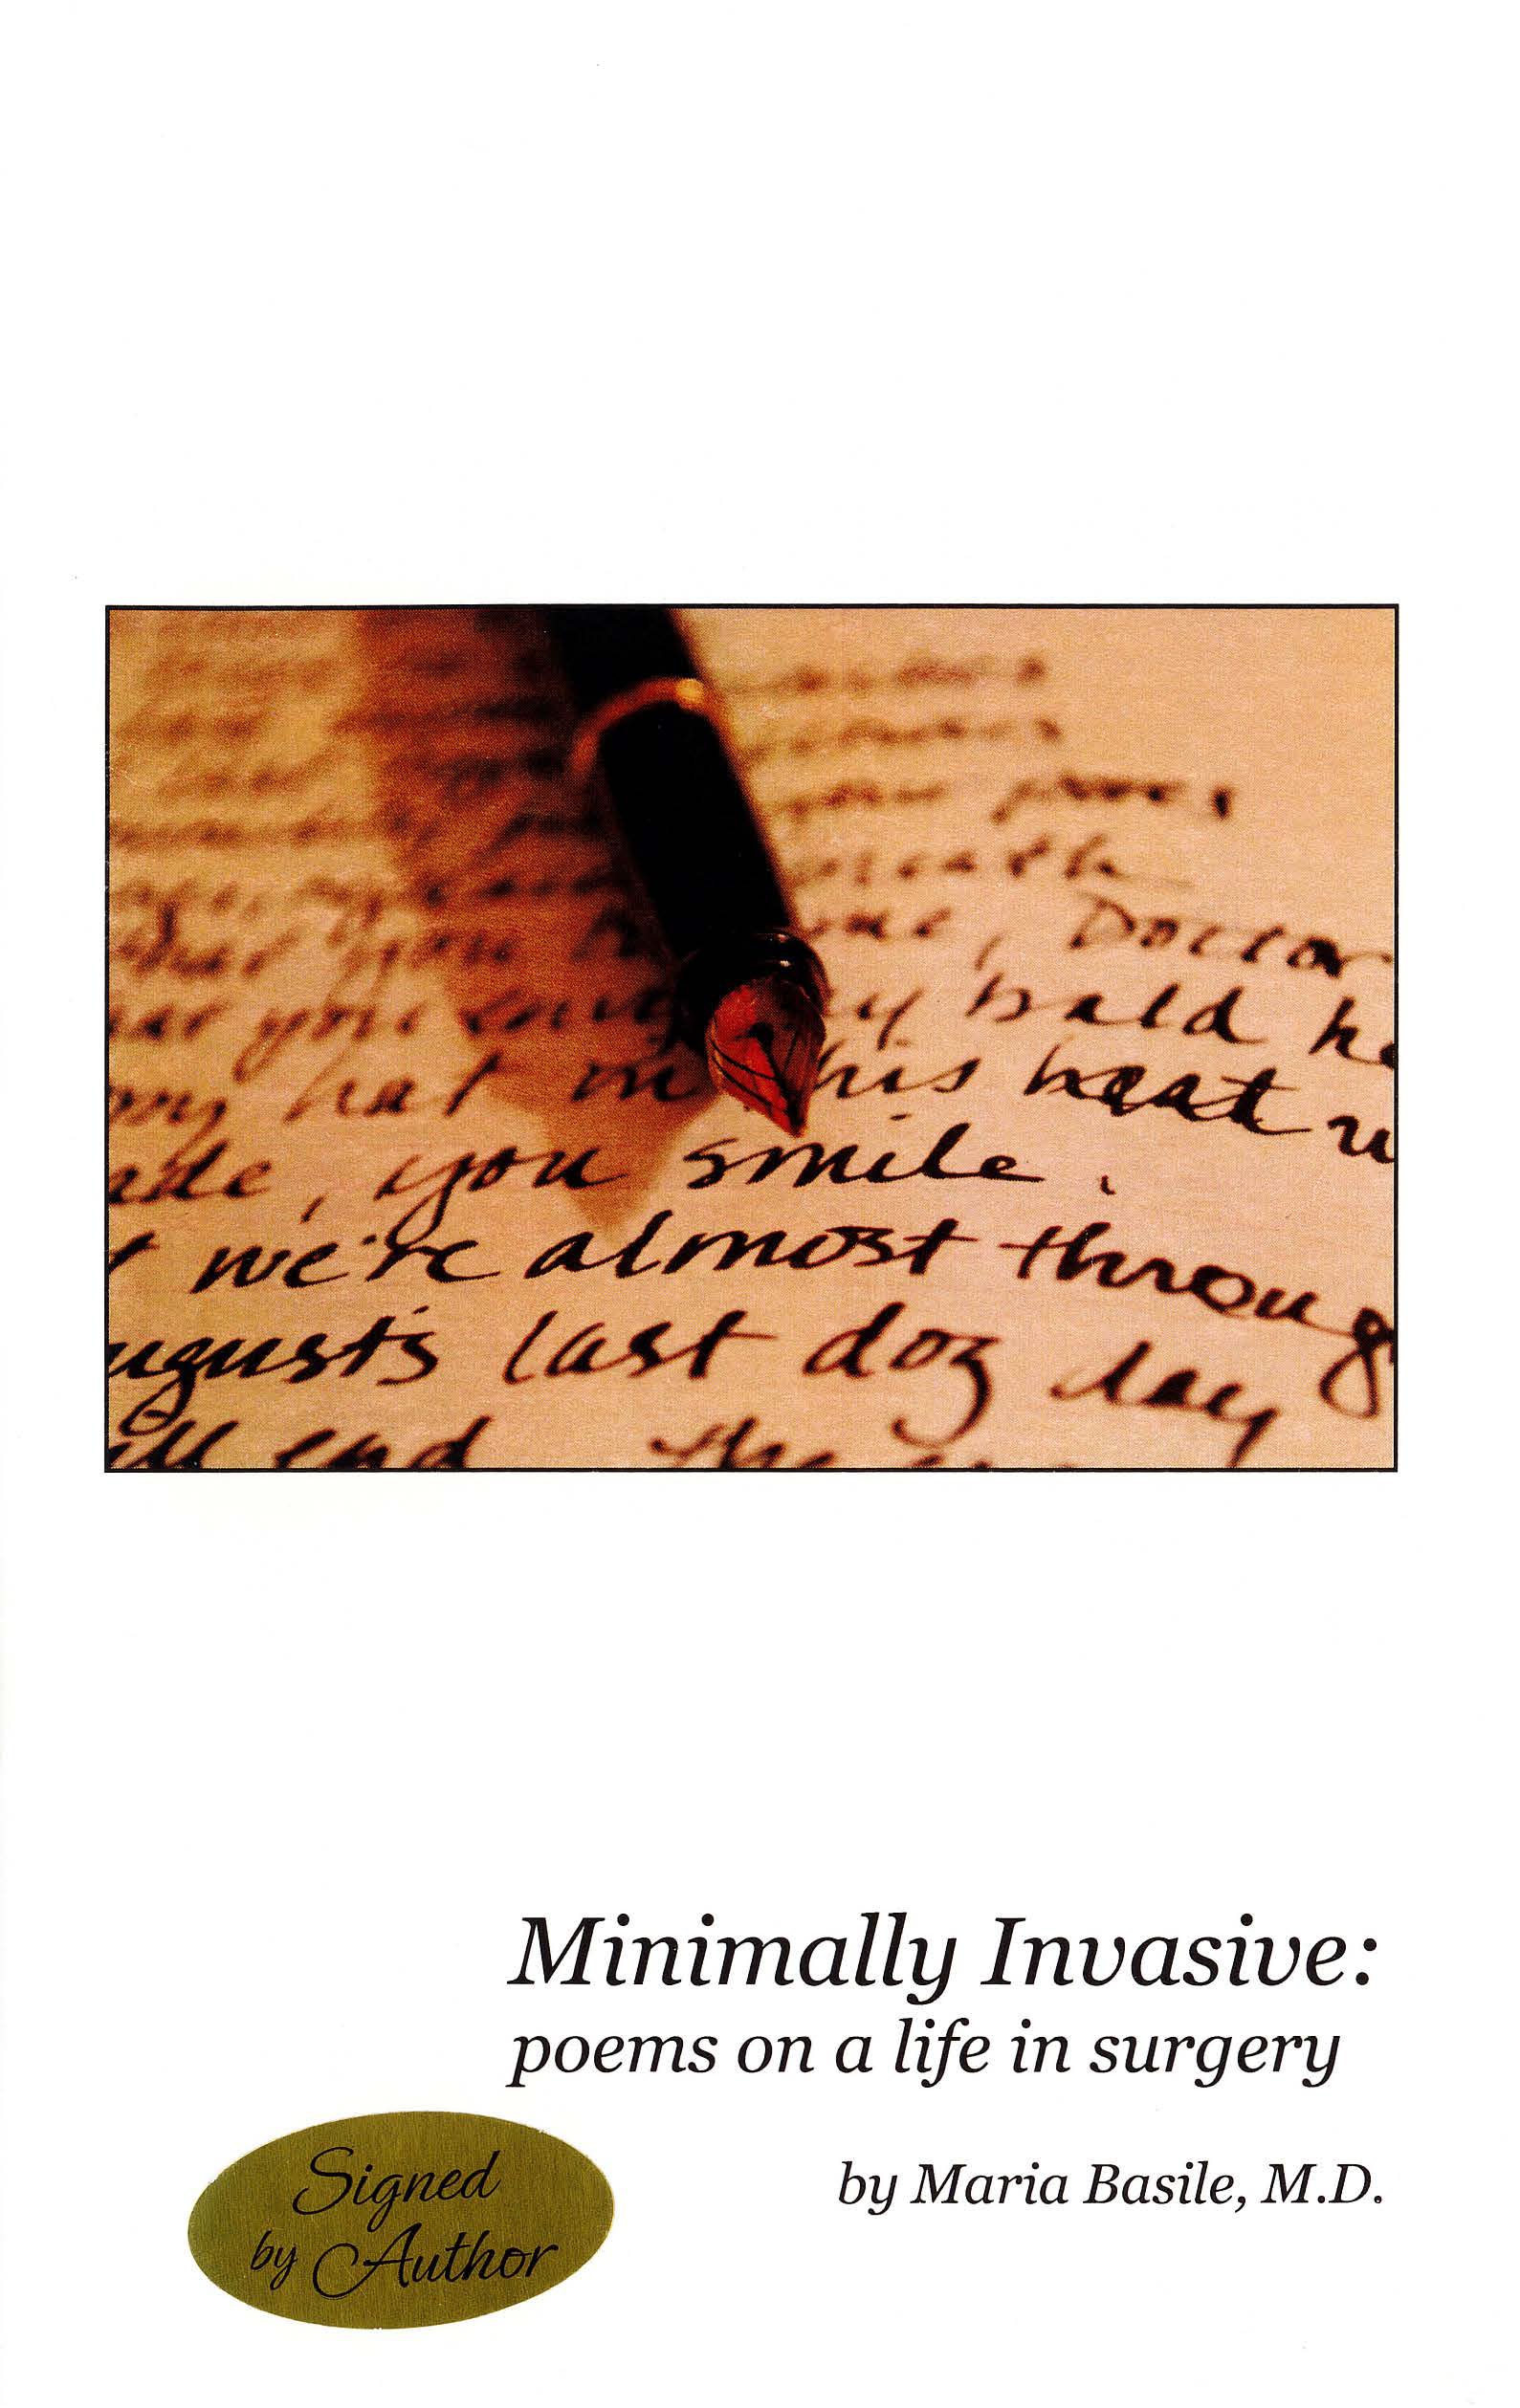 Minimally Invasive: poems on a life in surgery